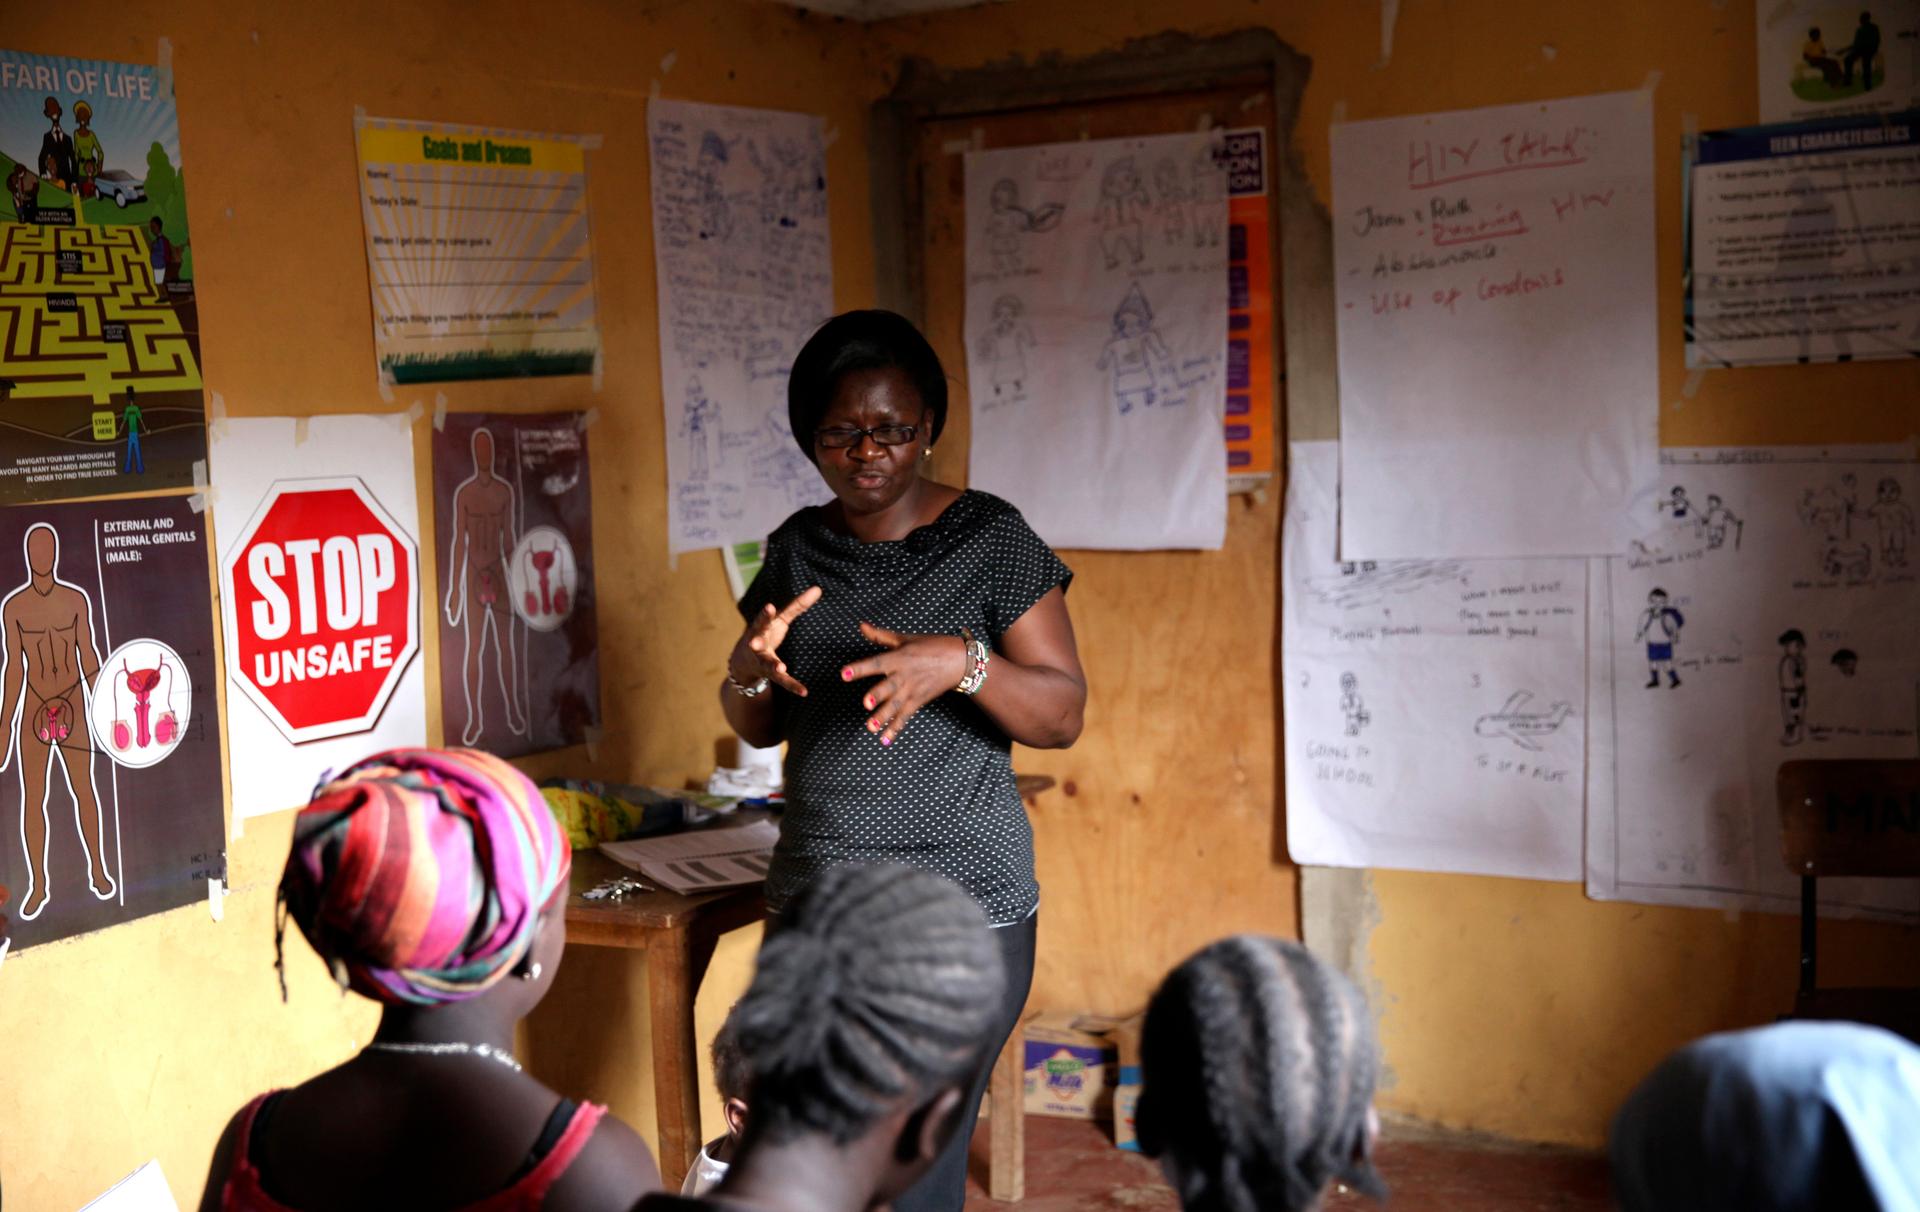 Evelyn Ojwang teaches children about HIV/AIDS at a health clinic within the Korogocho slum in Nairobi, February 16, 2015.